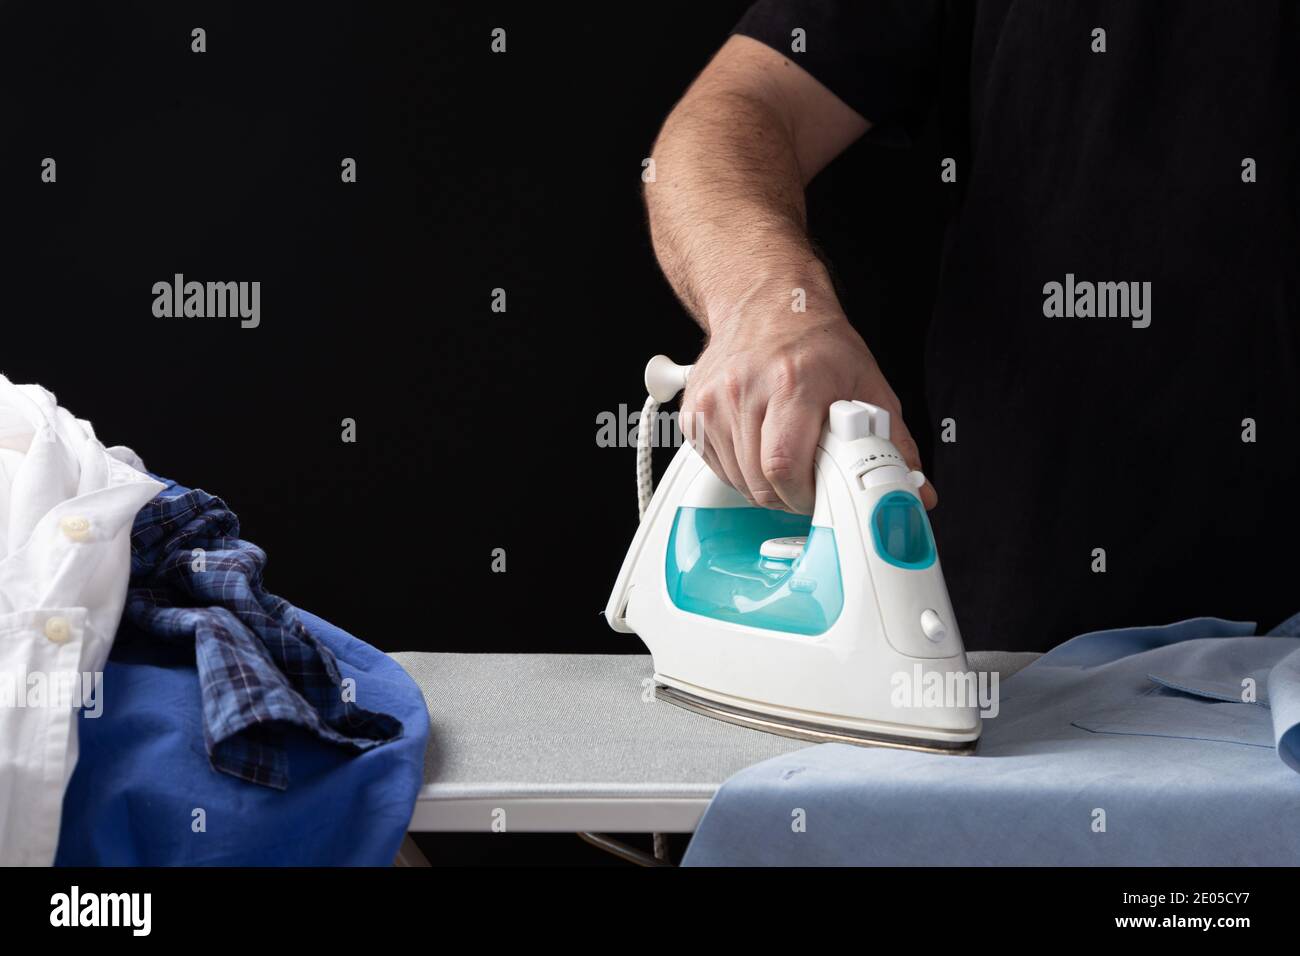 Woman Hand Ironing A Shirt, On Cloth Background Stock Photo